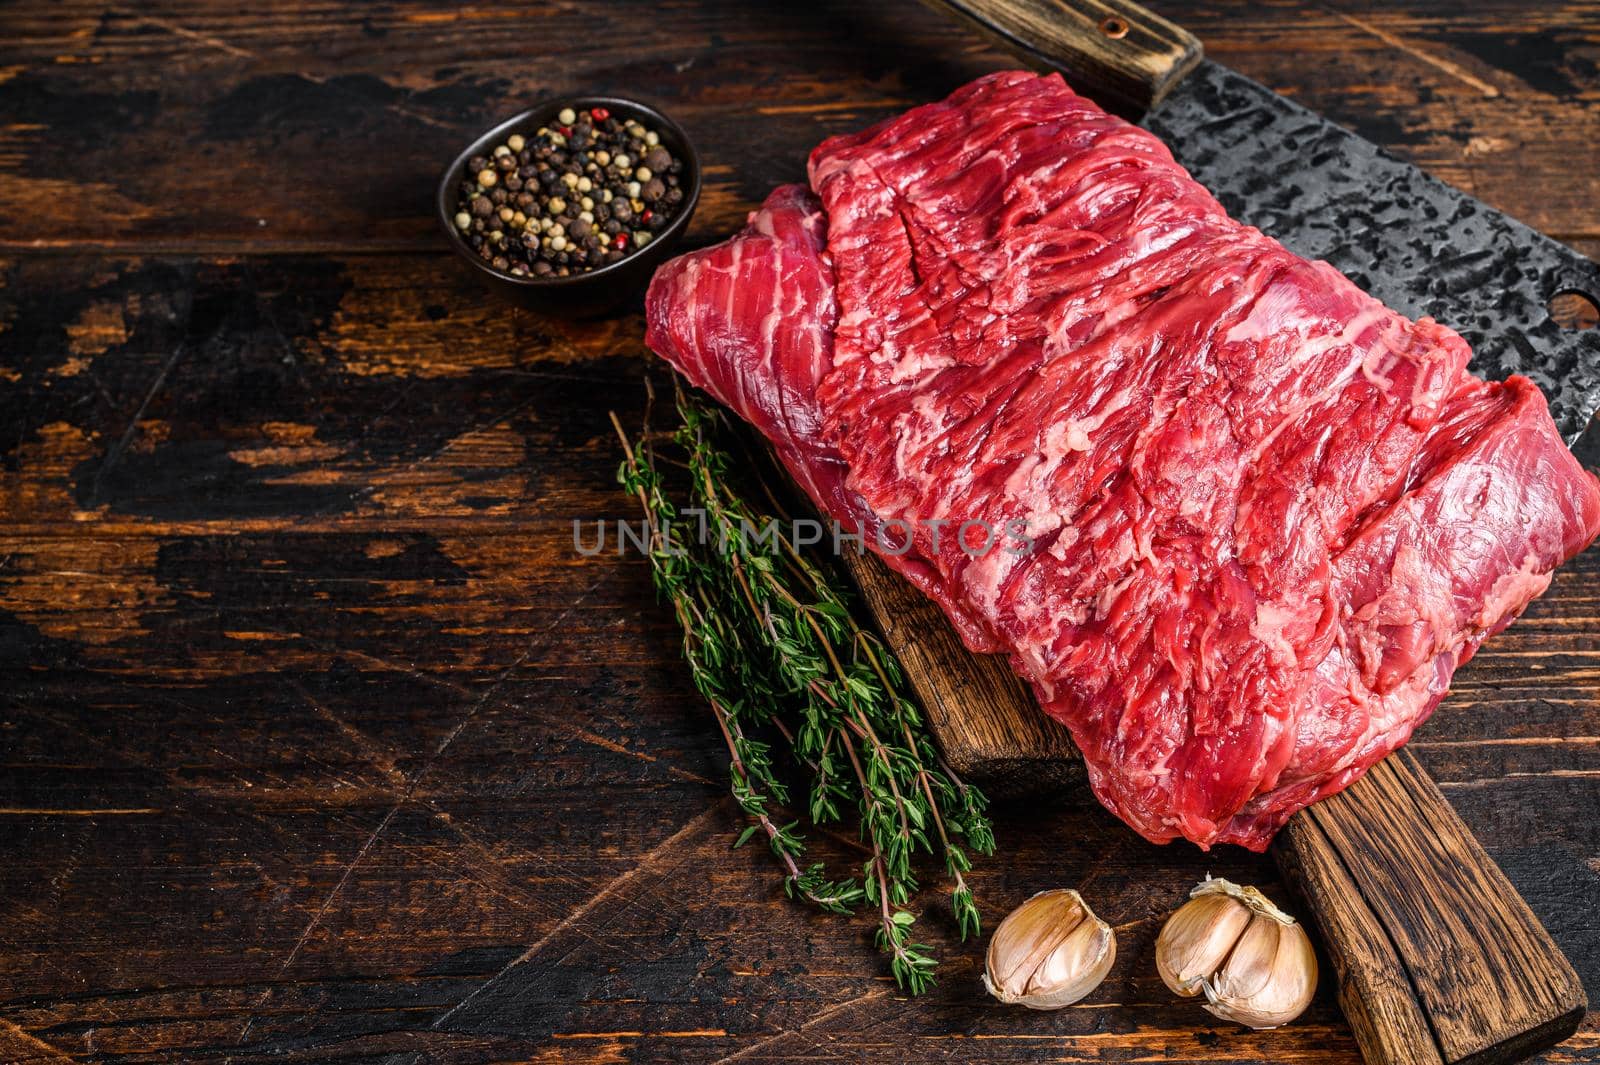 Big piece of raw beef brisket cut meat with herbs and butcher cleaver. Dark wooden background. Top view. Copy space.